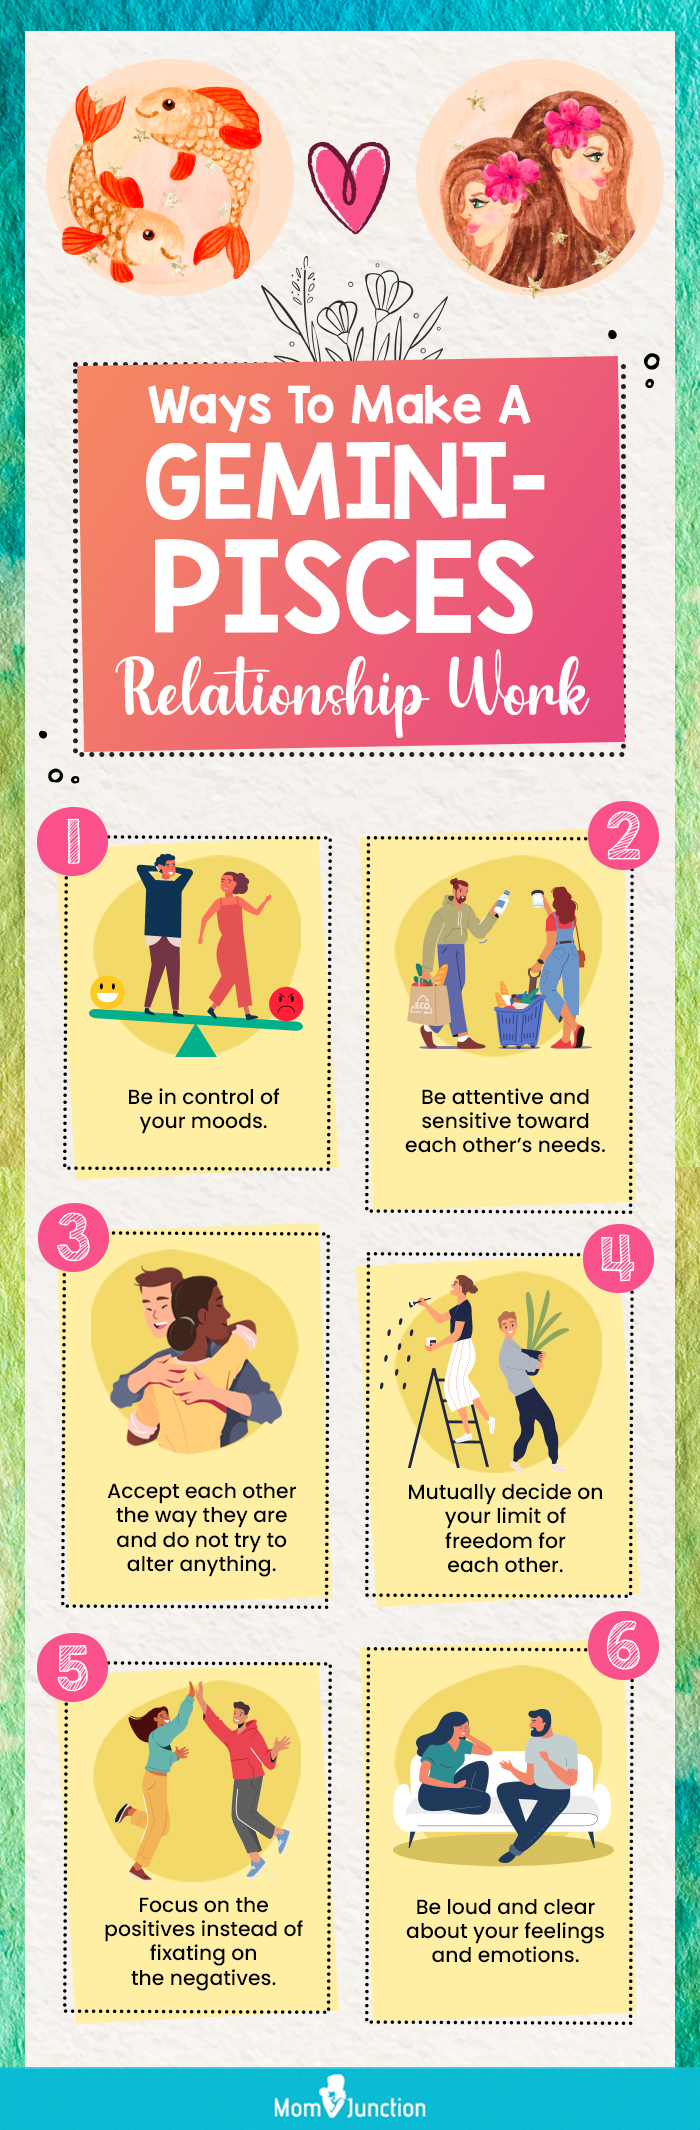 ways to make a gemini pisces relationship work [infographic]